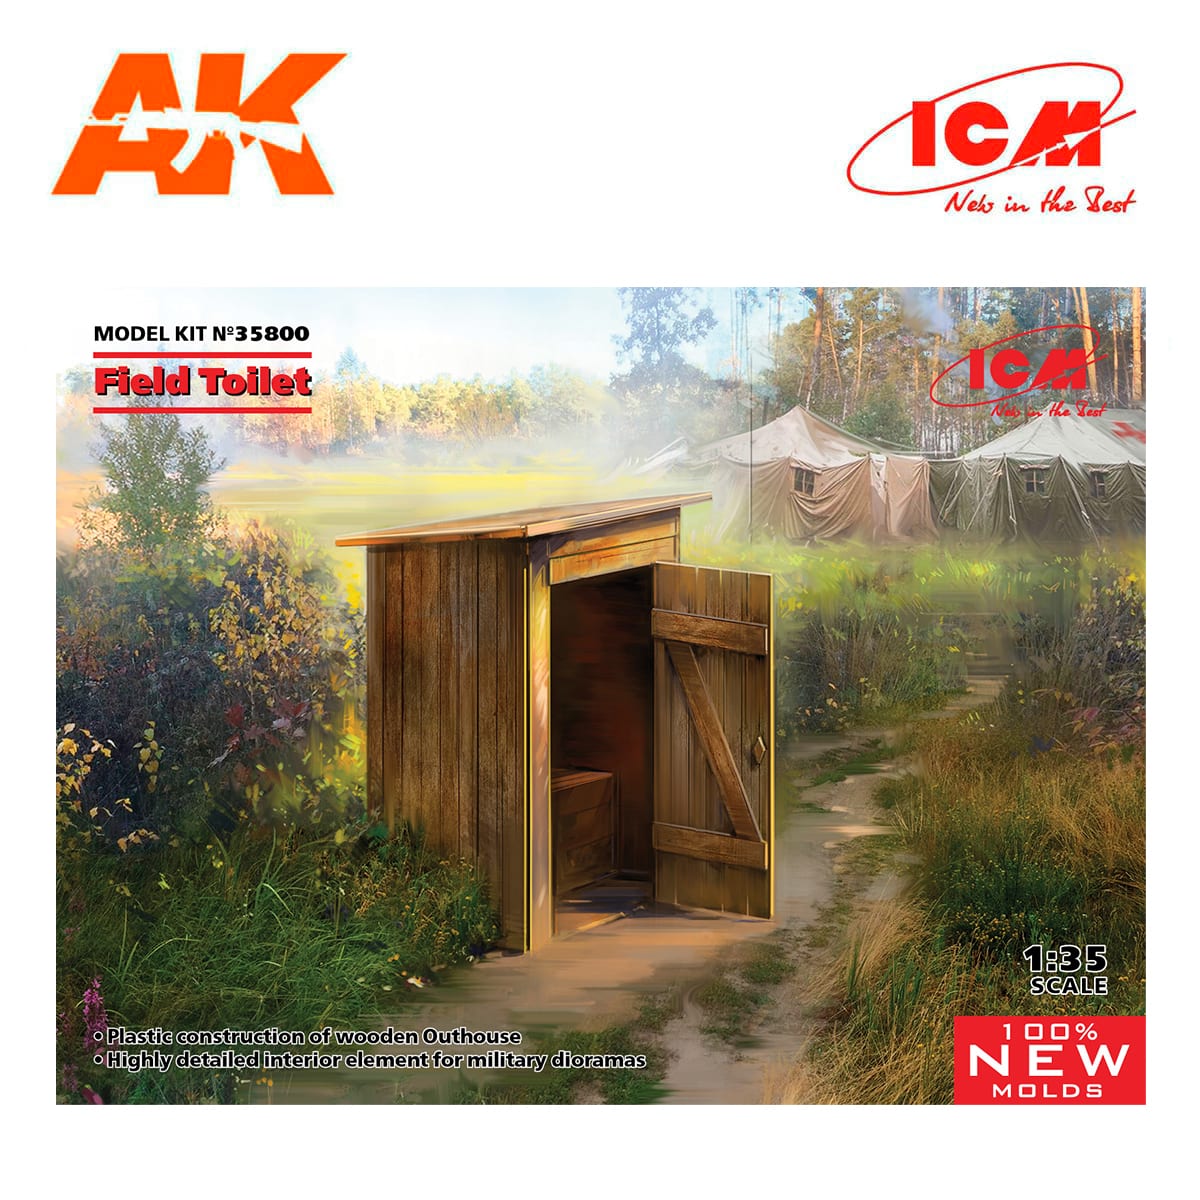 WC (Field Toilet) (100% new molds) 1/35